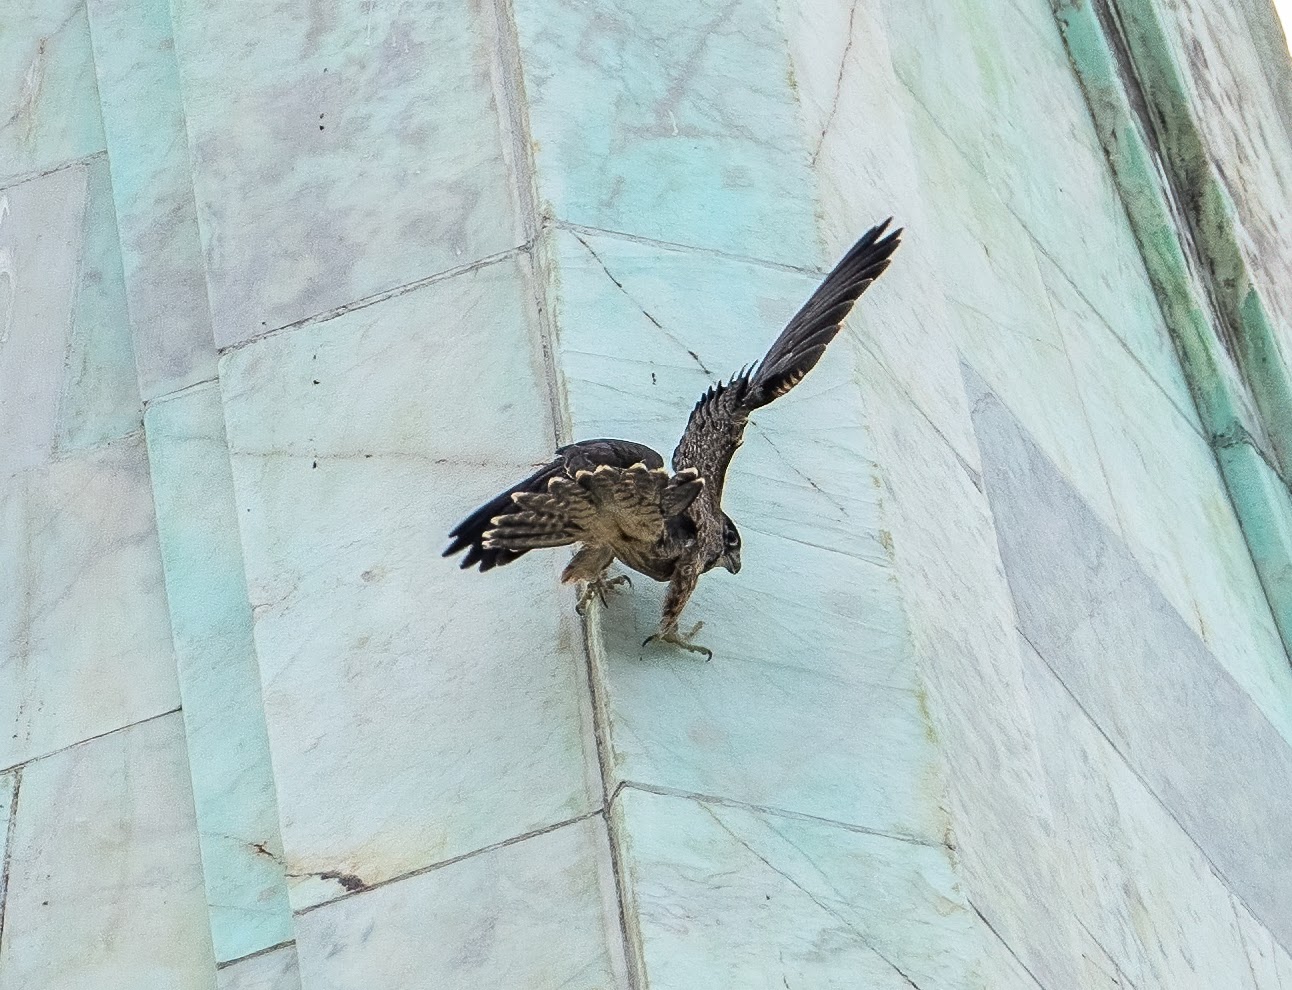 Eclipse, one of the two male falcons of 2024, attempts a tricky landing on the marble rooftop of the Campanile.